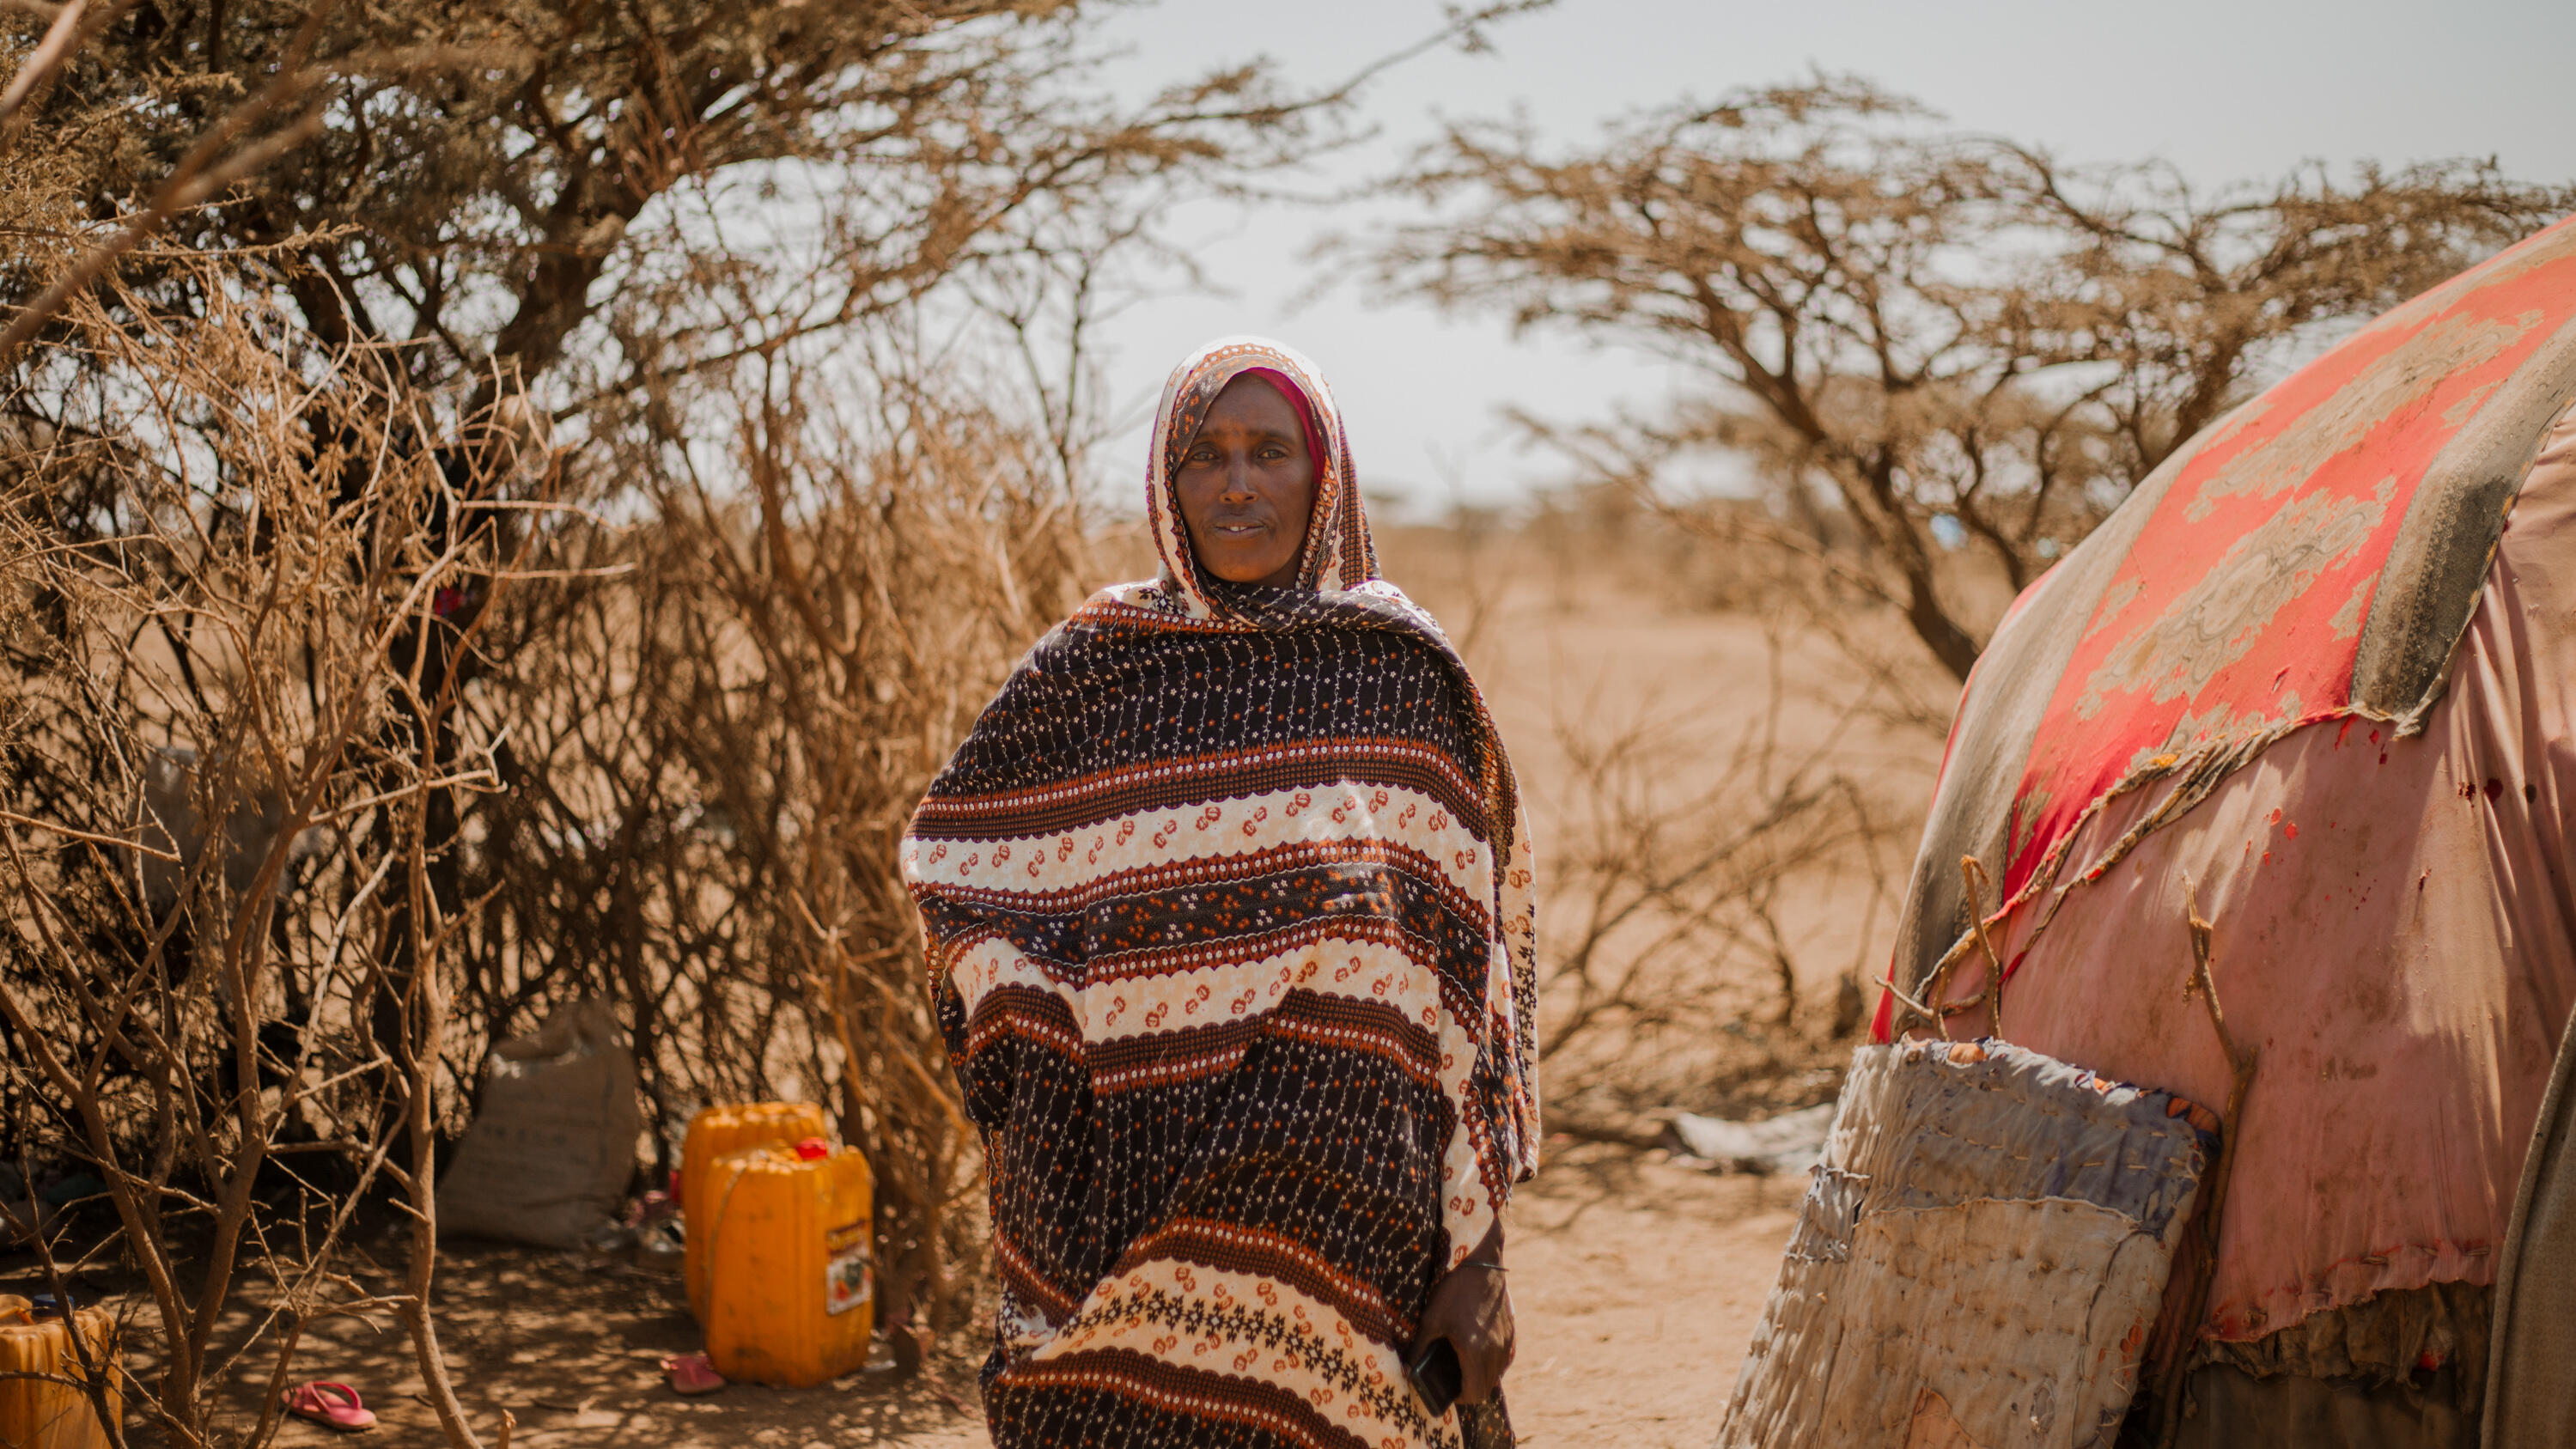 A woman poses for a photo amidst a barren landscape in Ethiopia.